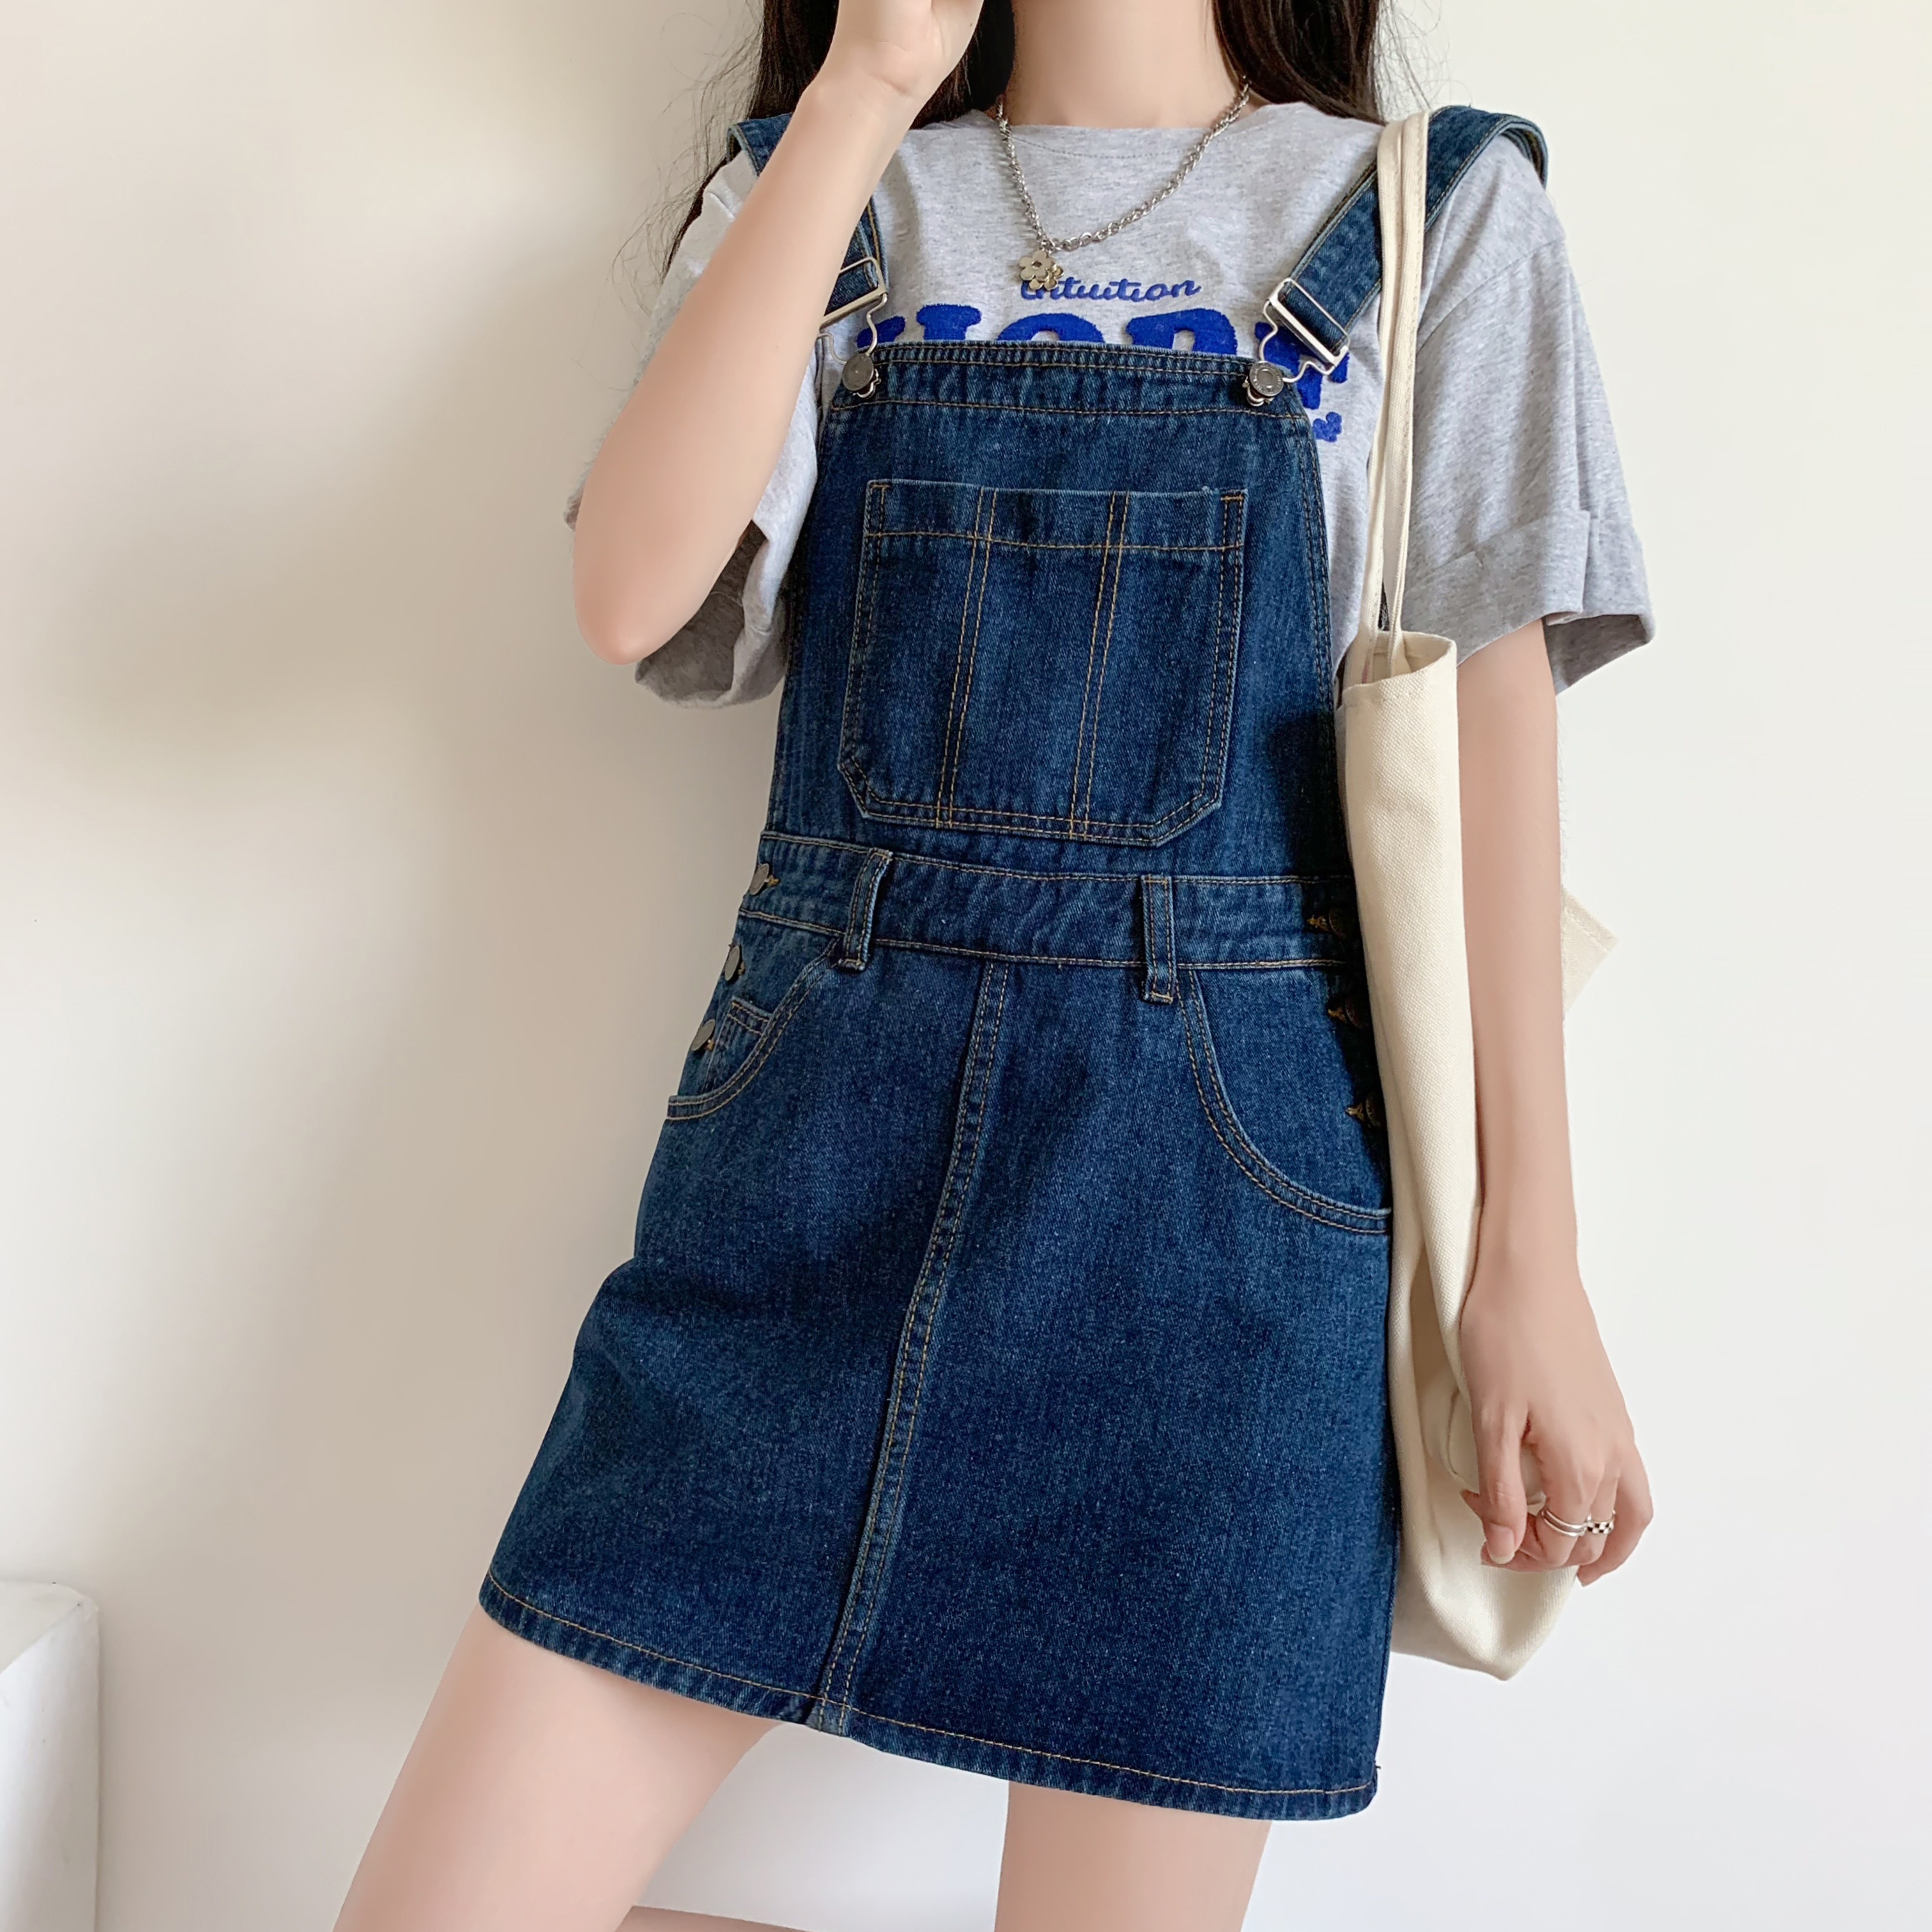 

Women's Summer Blue Denim Overall Dress, Cute Loose-fit Mini Dress With Adjustable Straps